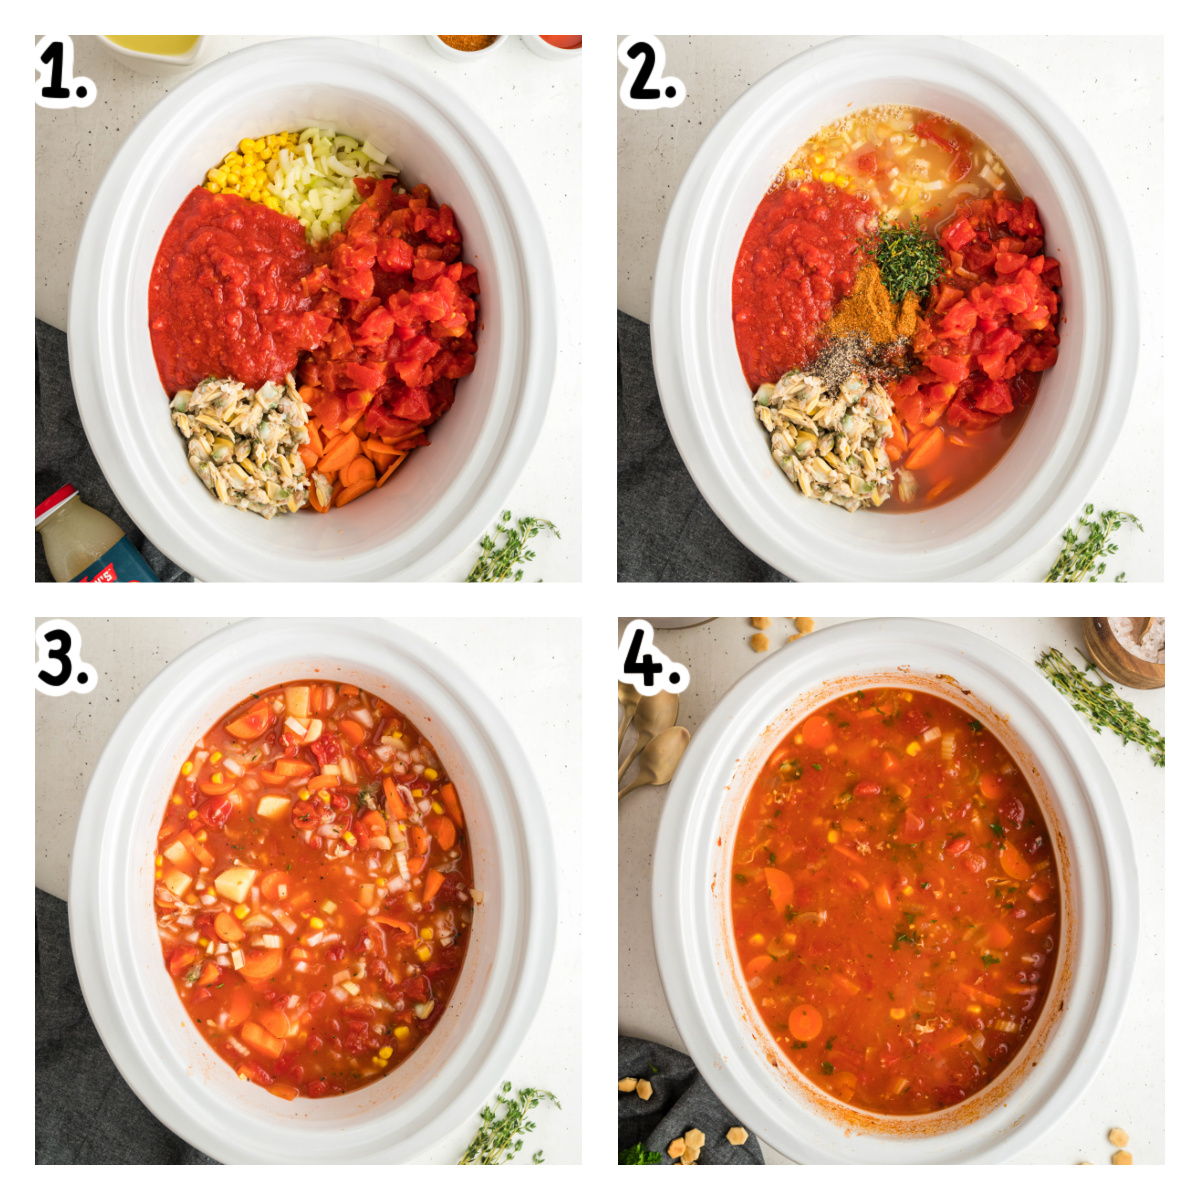 Four images showing how to make manhattan clam chowder in a slow cooker.